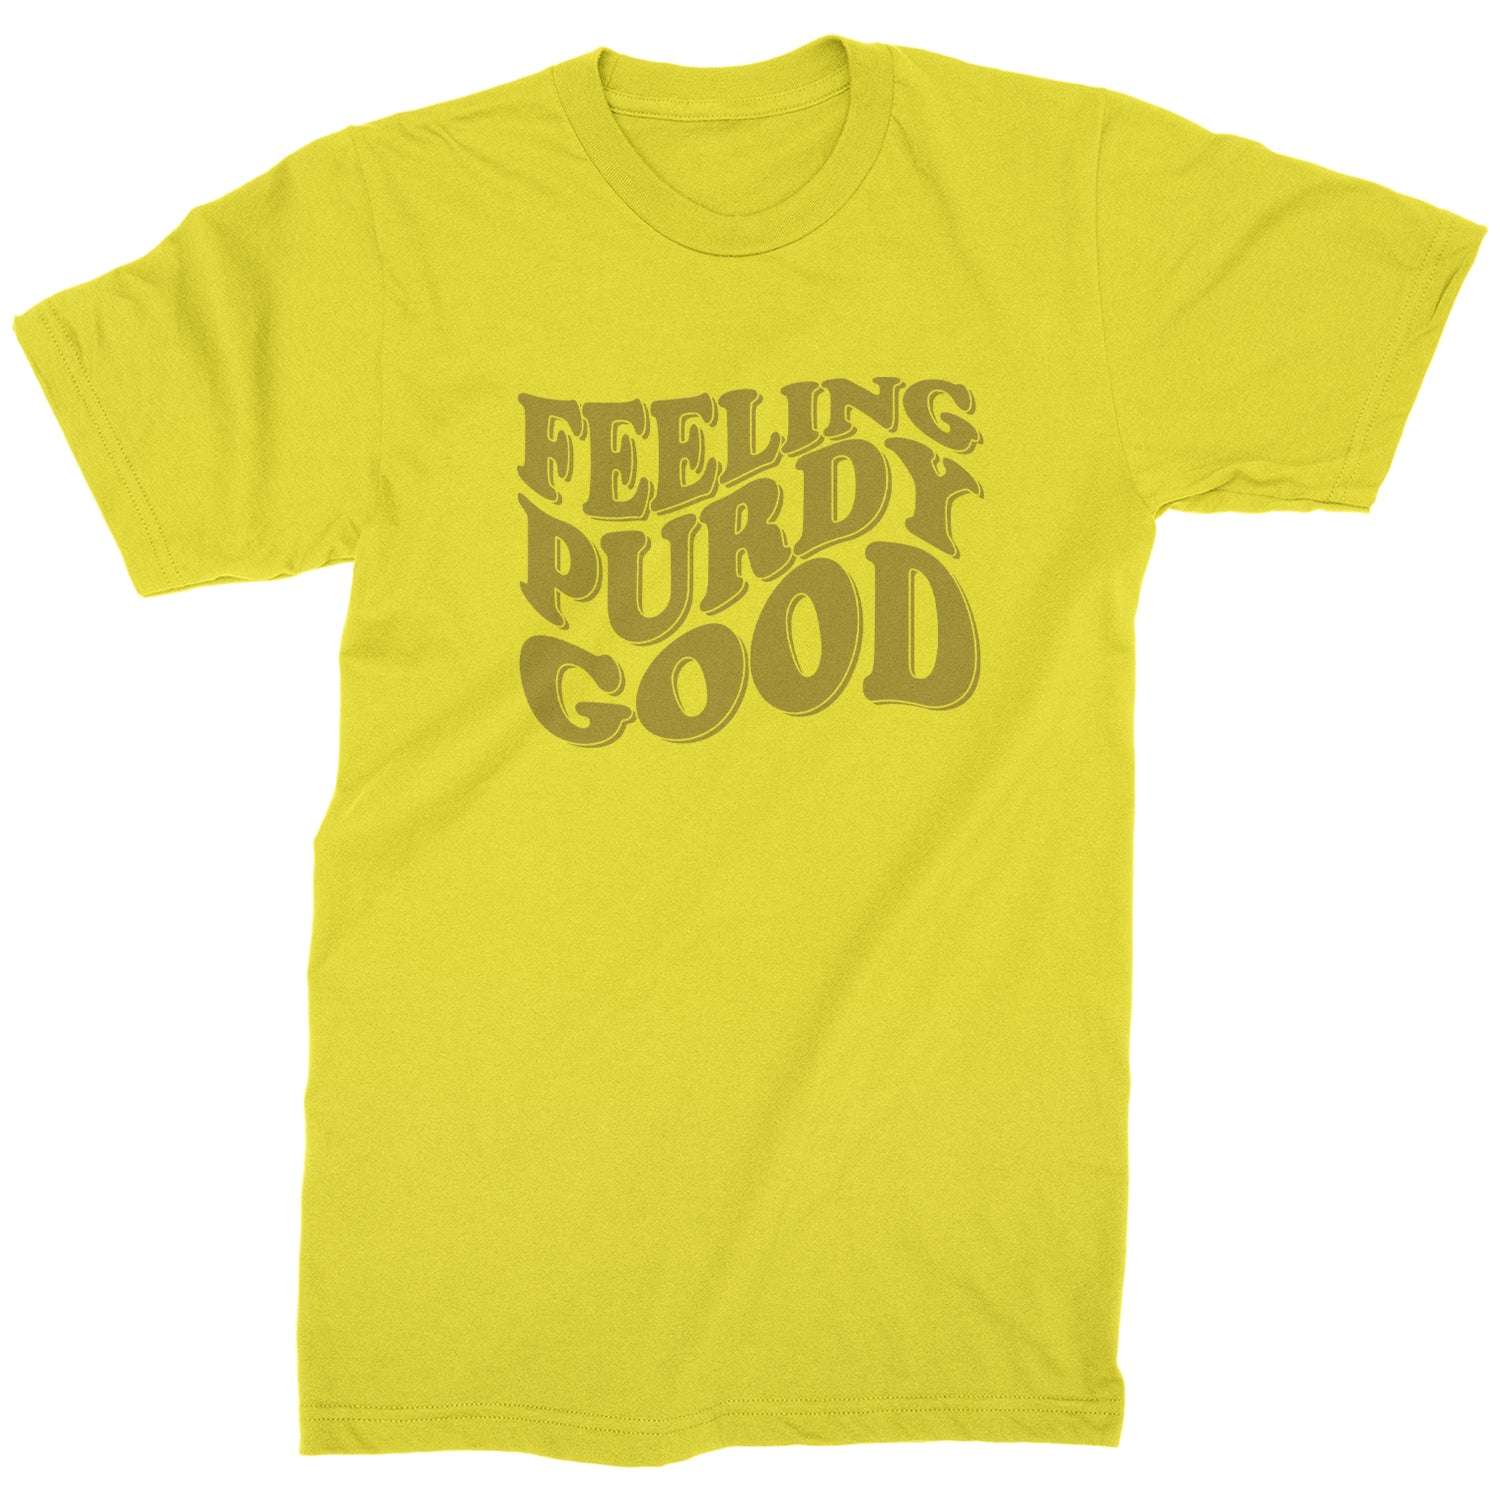 Feeling Purdy Good Mens T-shirt 13, football by Expression Tees